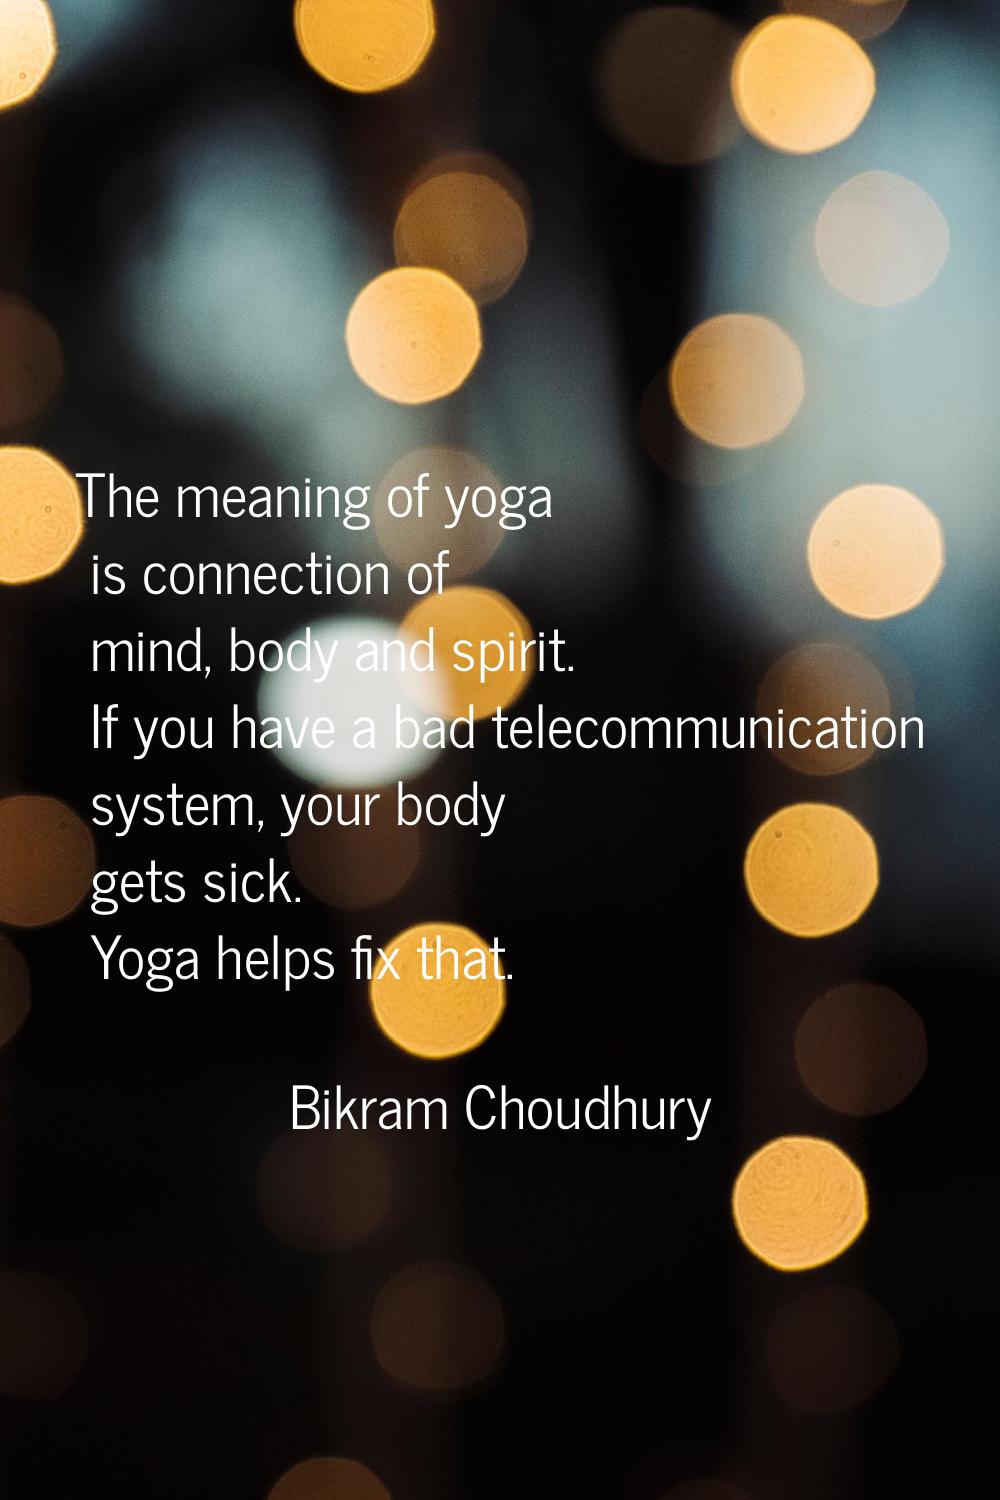 The meaning of yoga is connection of mind, body and spirit. If you have a bad telecommunication sys